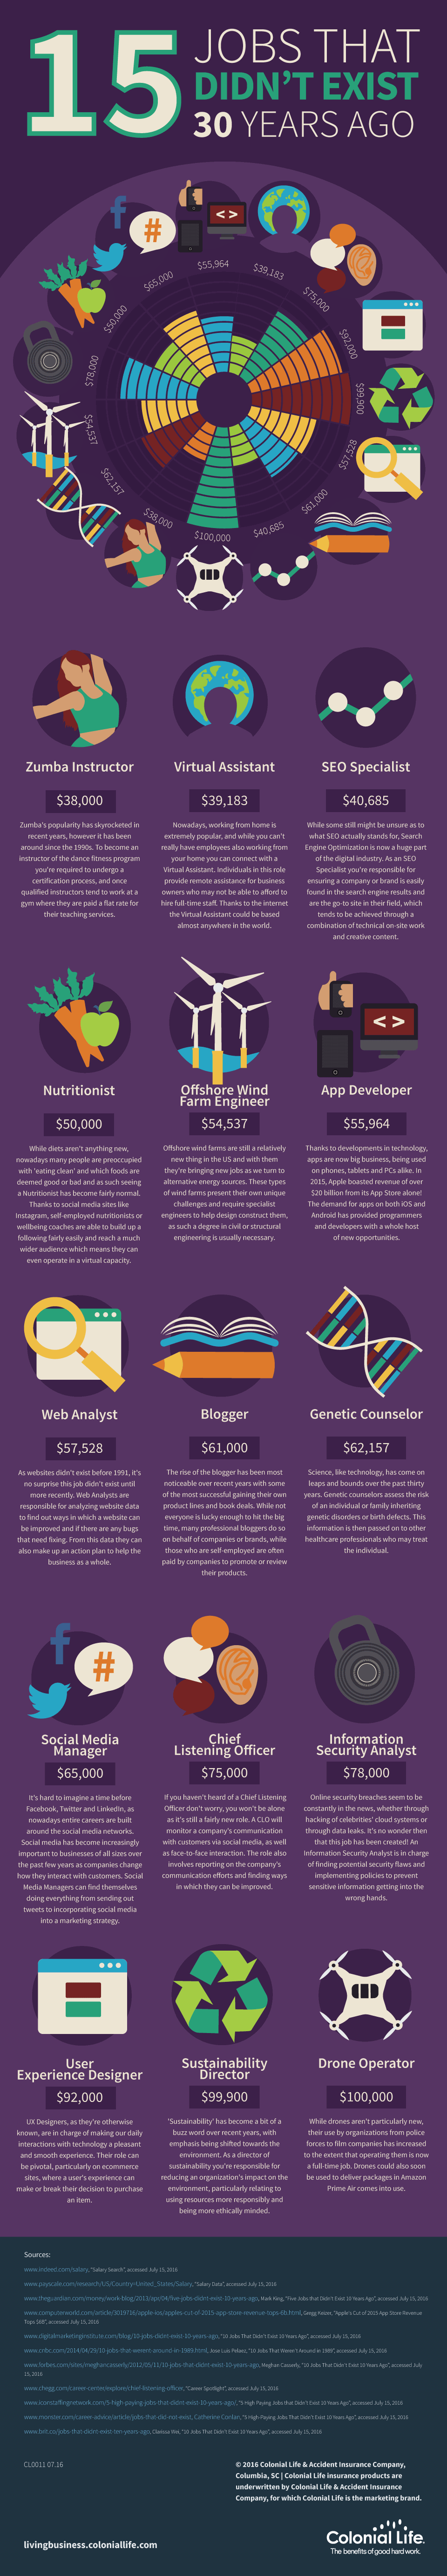 15 Jobs That Never Existed 30 Years Ago - infographic